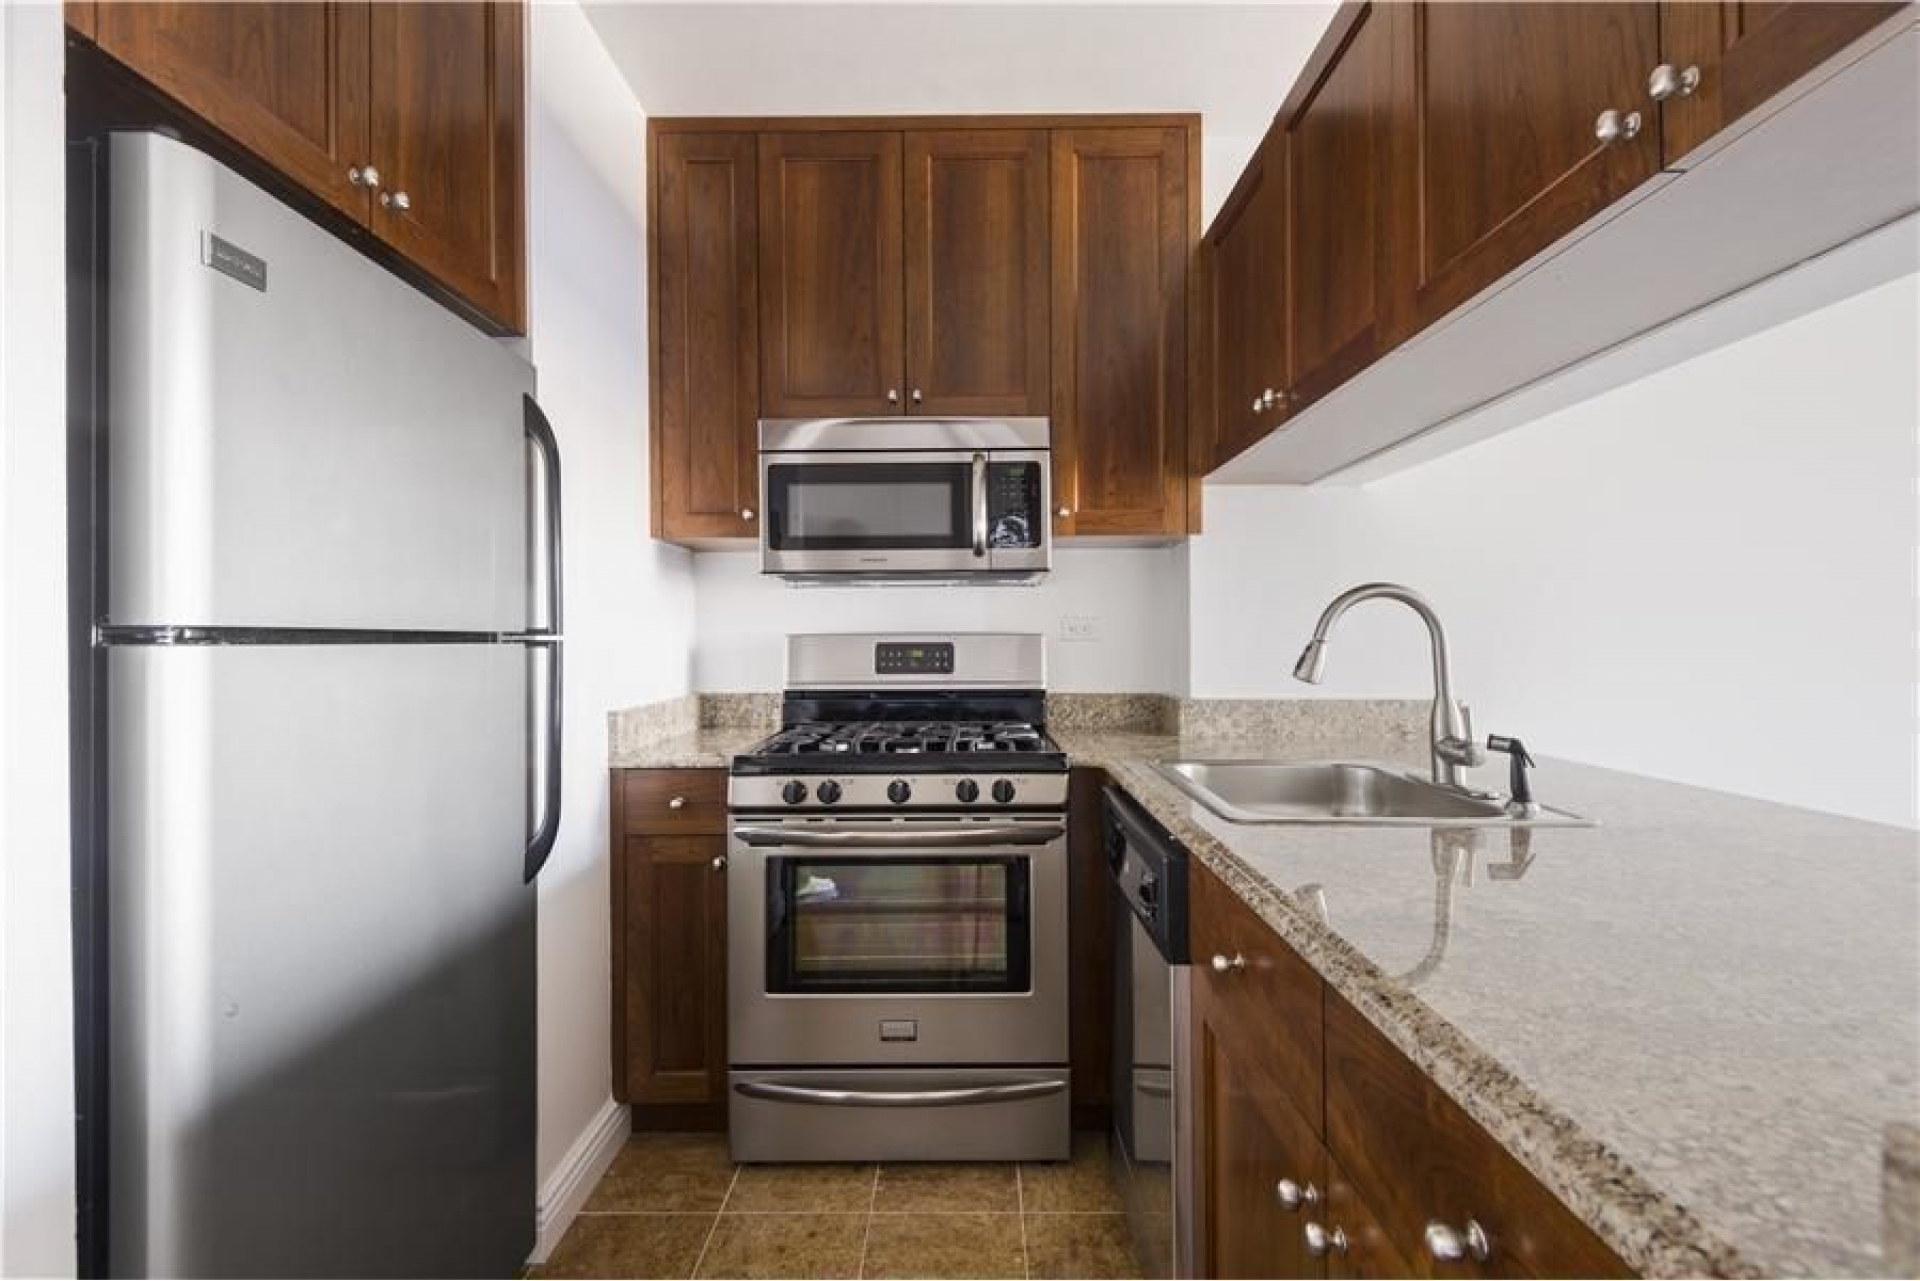 Dotta 2 rooms apartment for sale - THE STANFORD - Nomad - New York  - img396035601